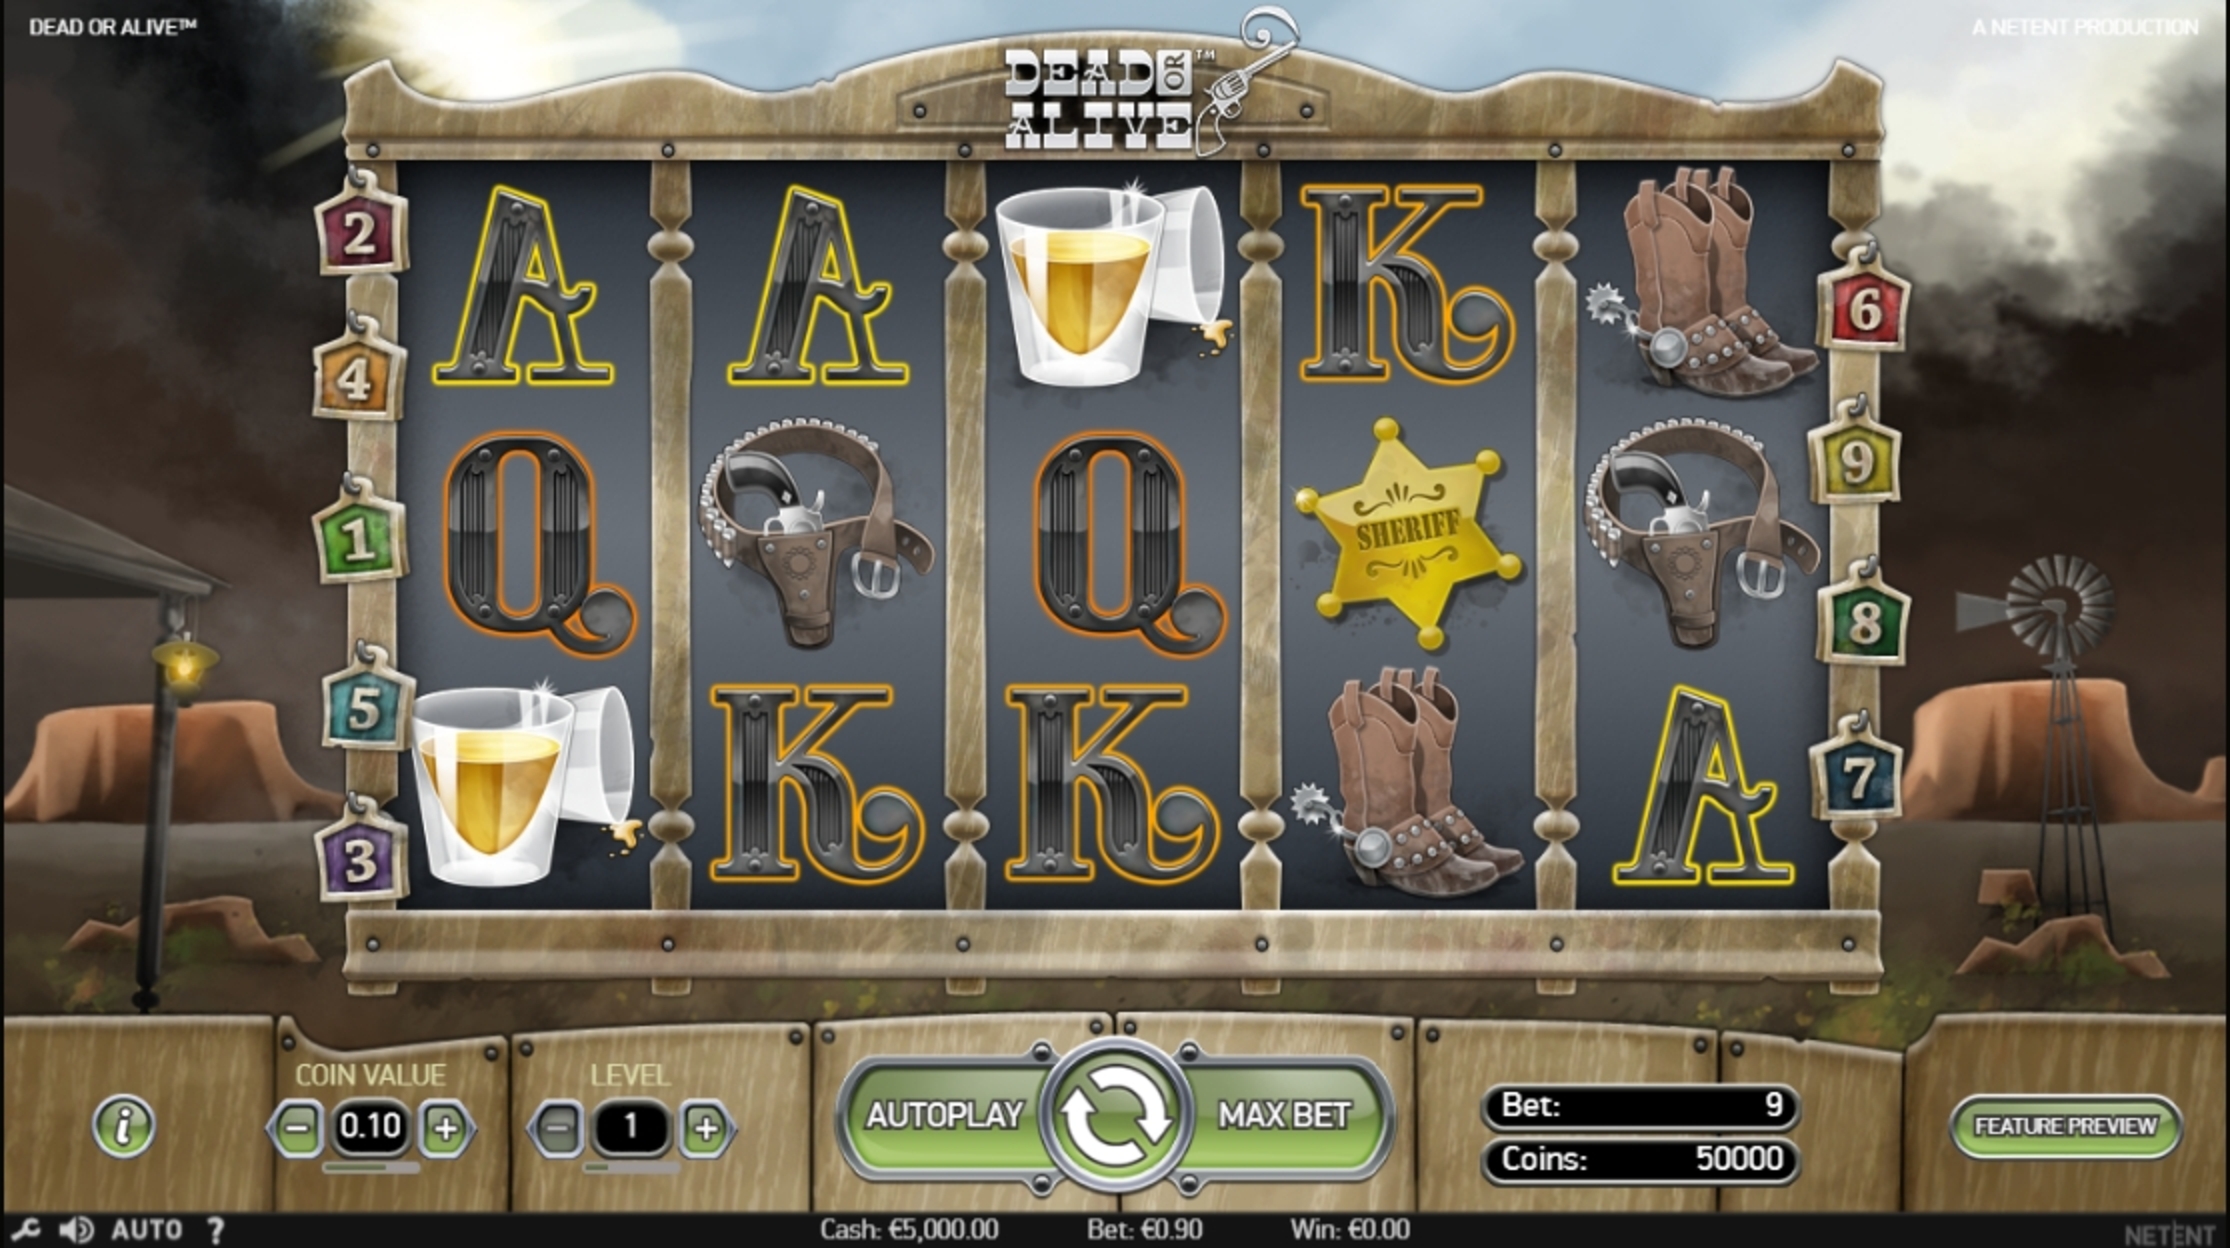 Reels in Dead or Alive Slot Game by NetEnt